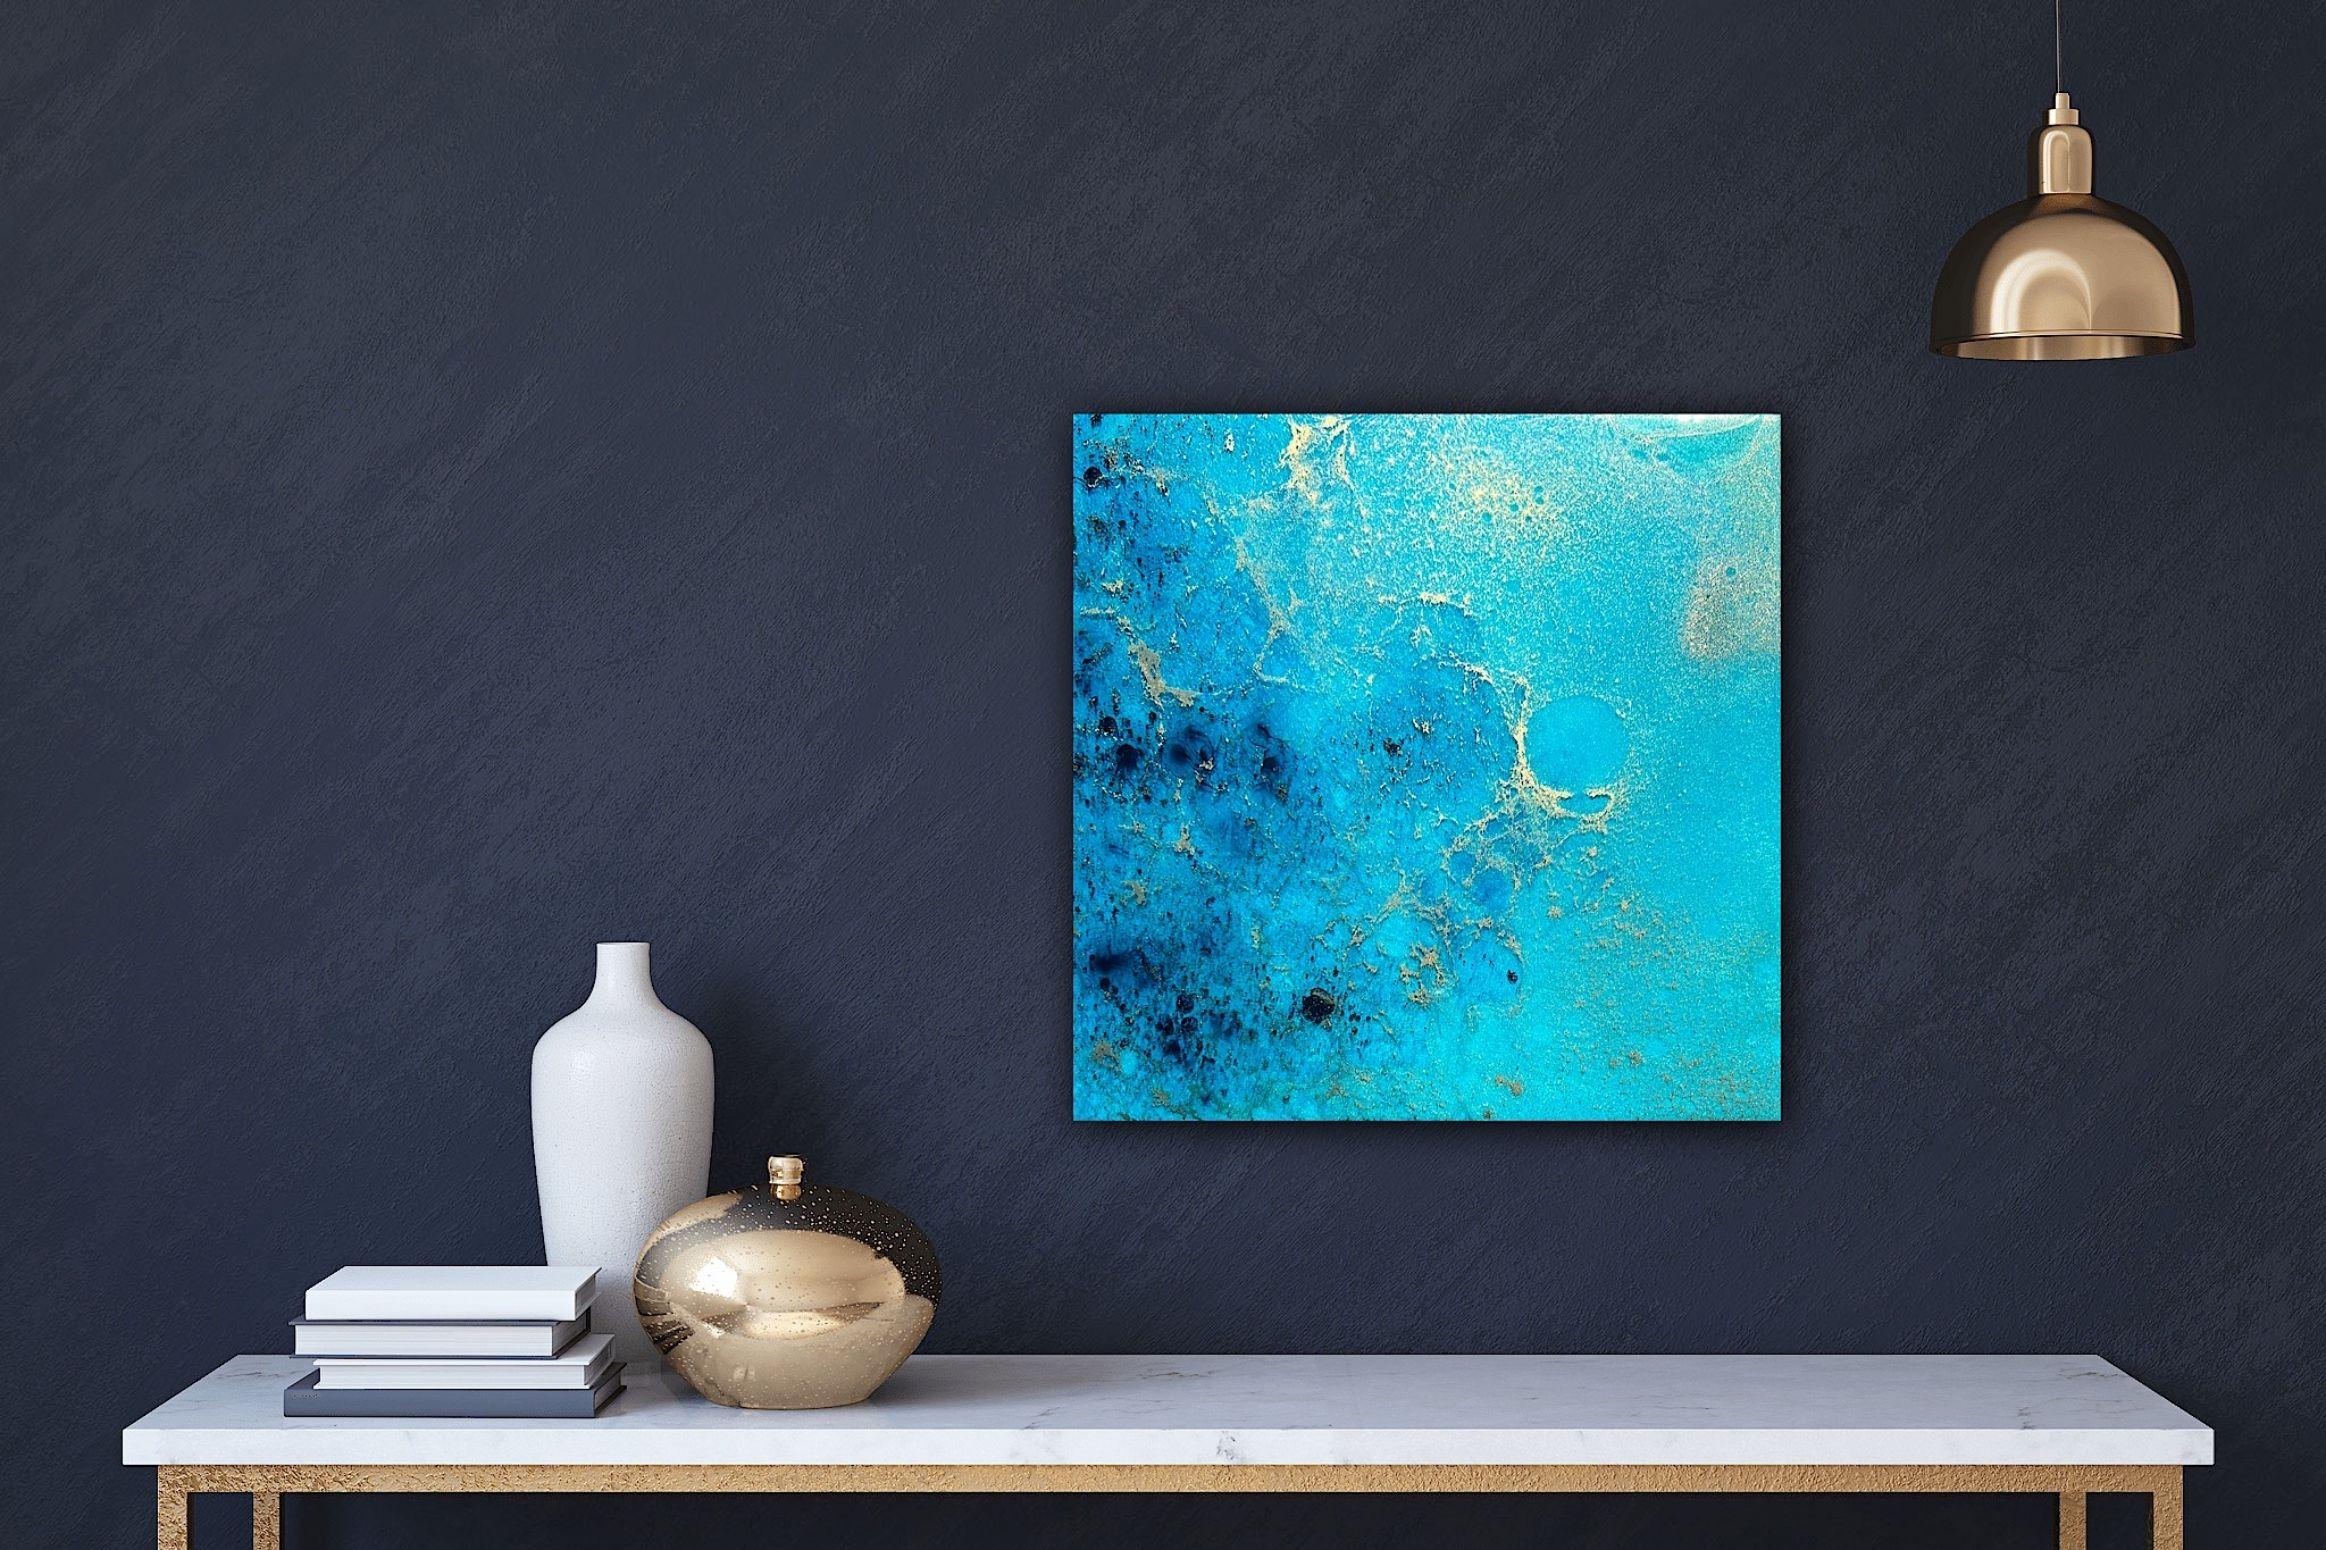 Coral reef painting - inspired by the amazing aerial views of The great Barrier Reef in Australia Dealing with depression, PTSD and anxiety, painting is a form of therapy for me. In this painting I create a peaceful and safe space for the child and